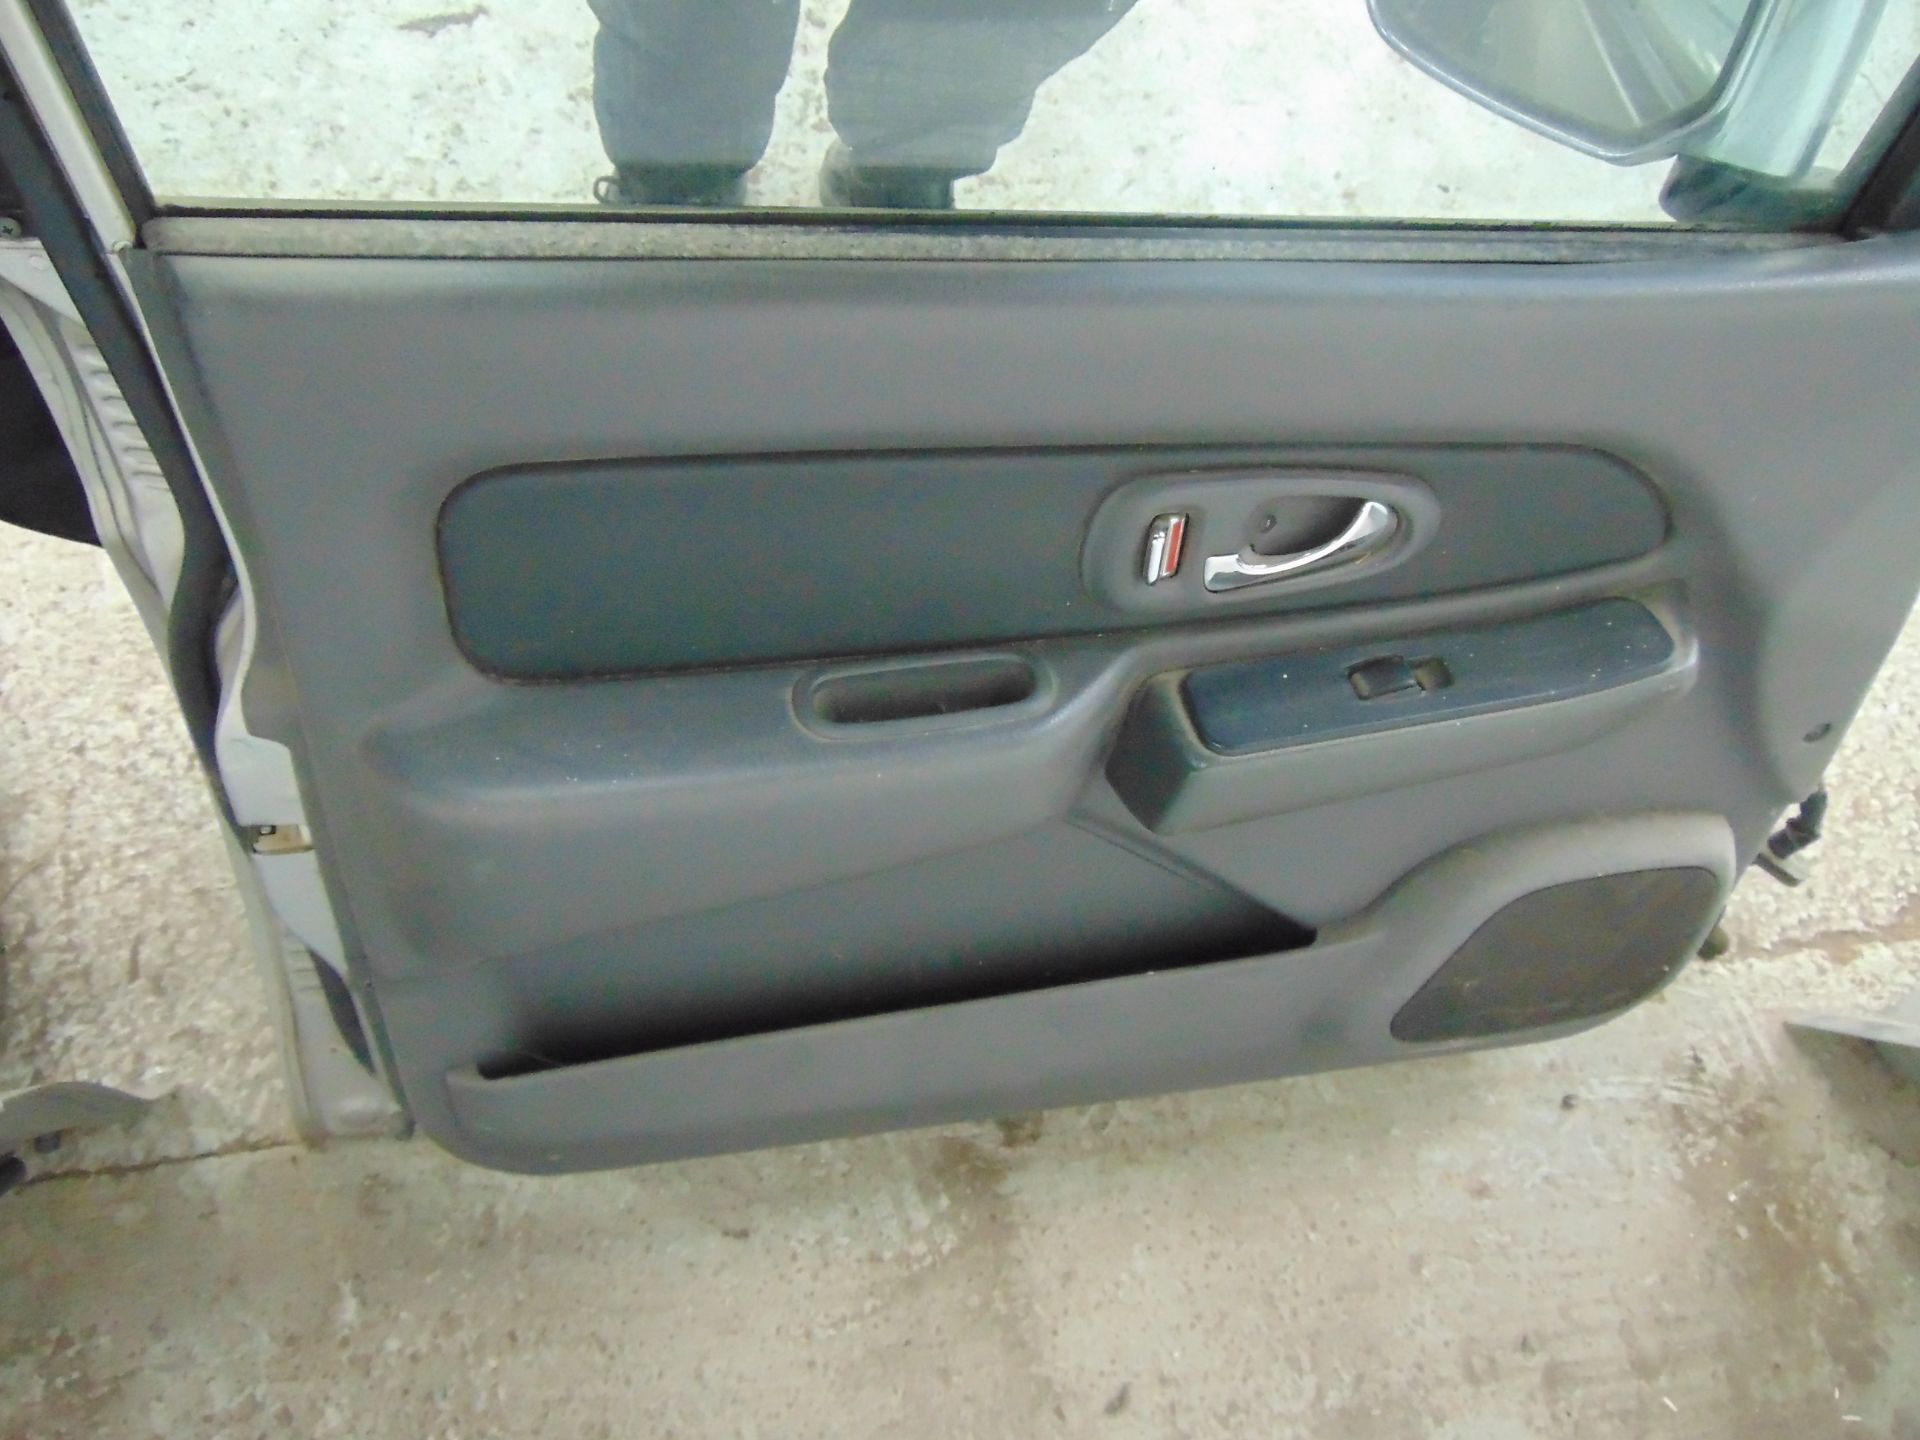 L200 warrior doors in silver o/s front o/s rear n/s front n/s rear and tailgate - Image 9 of 12